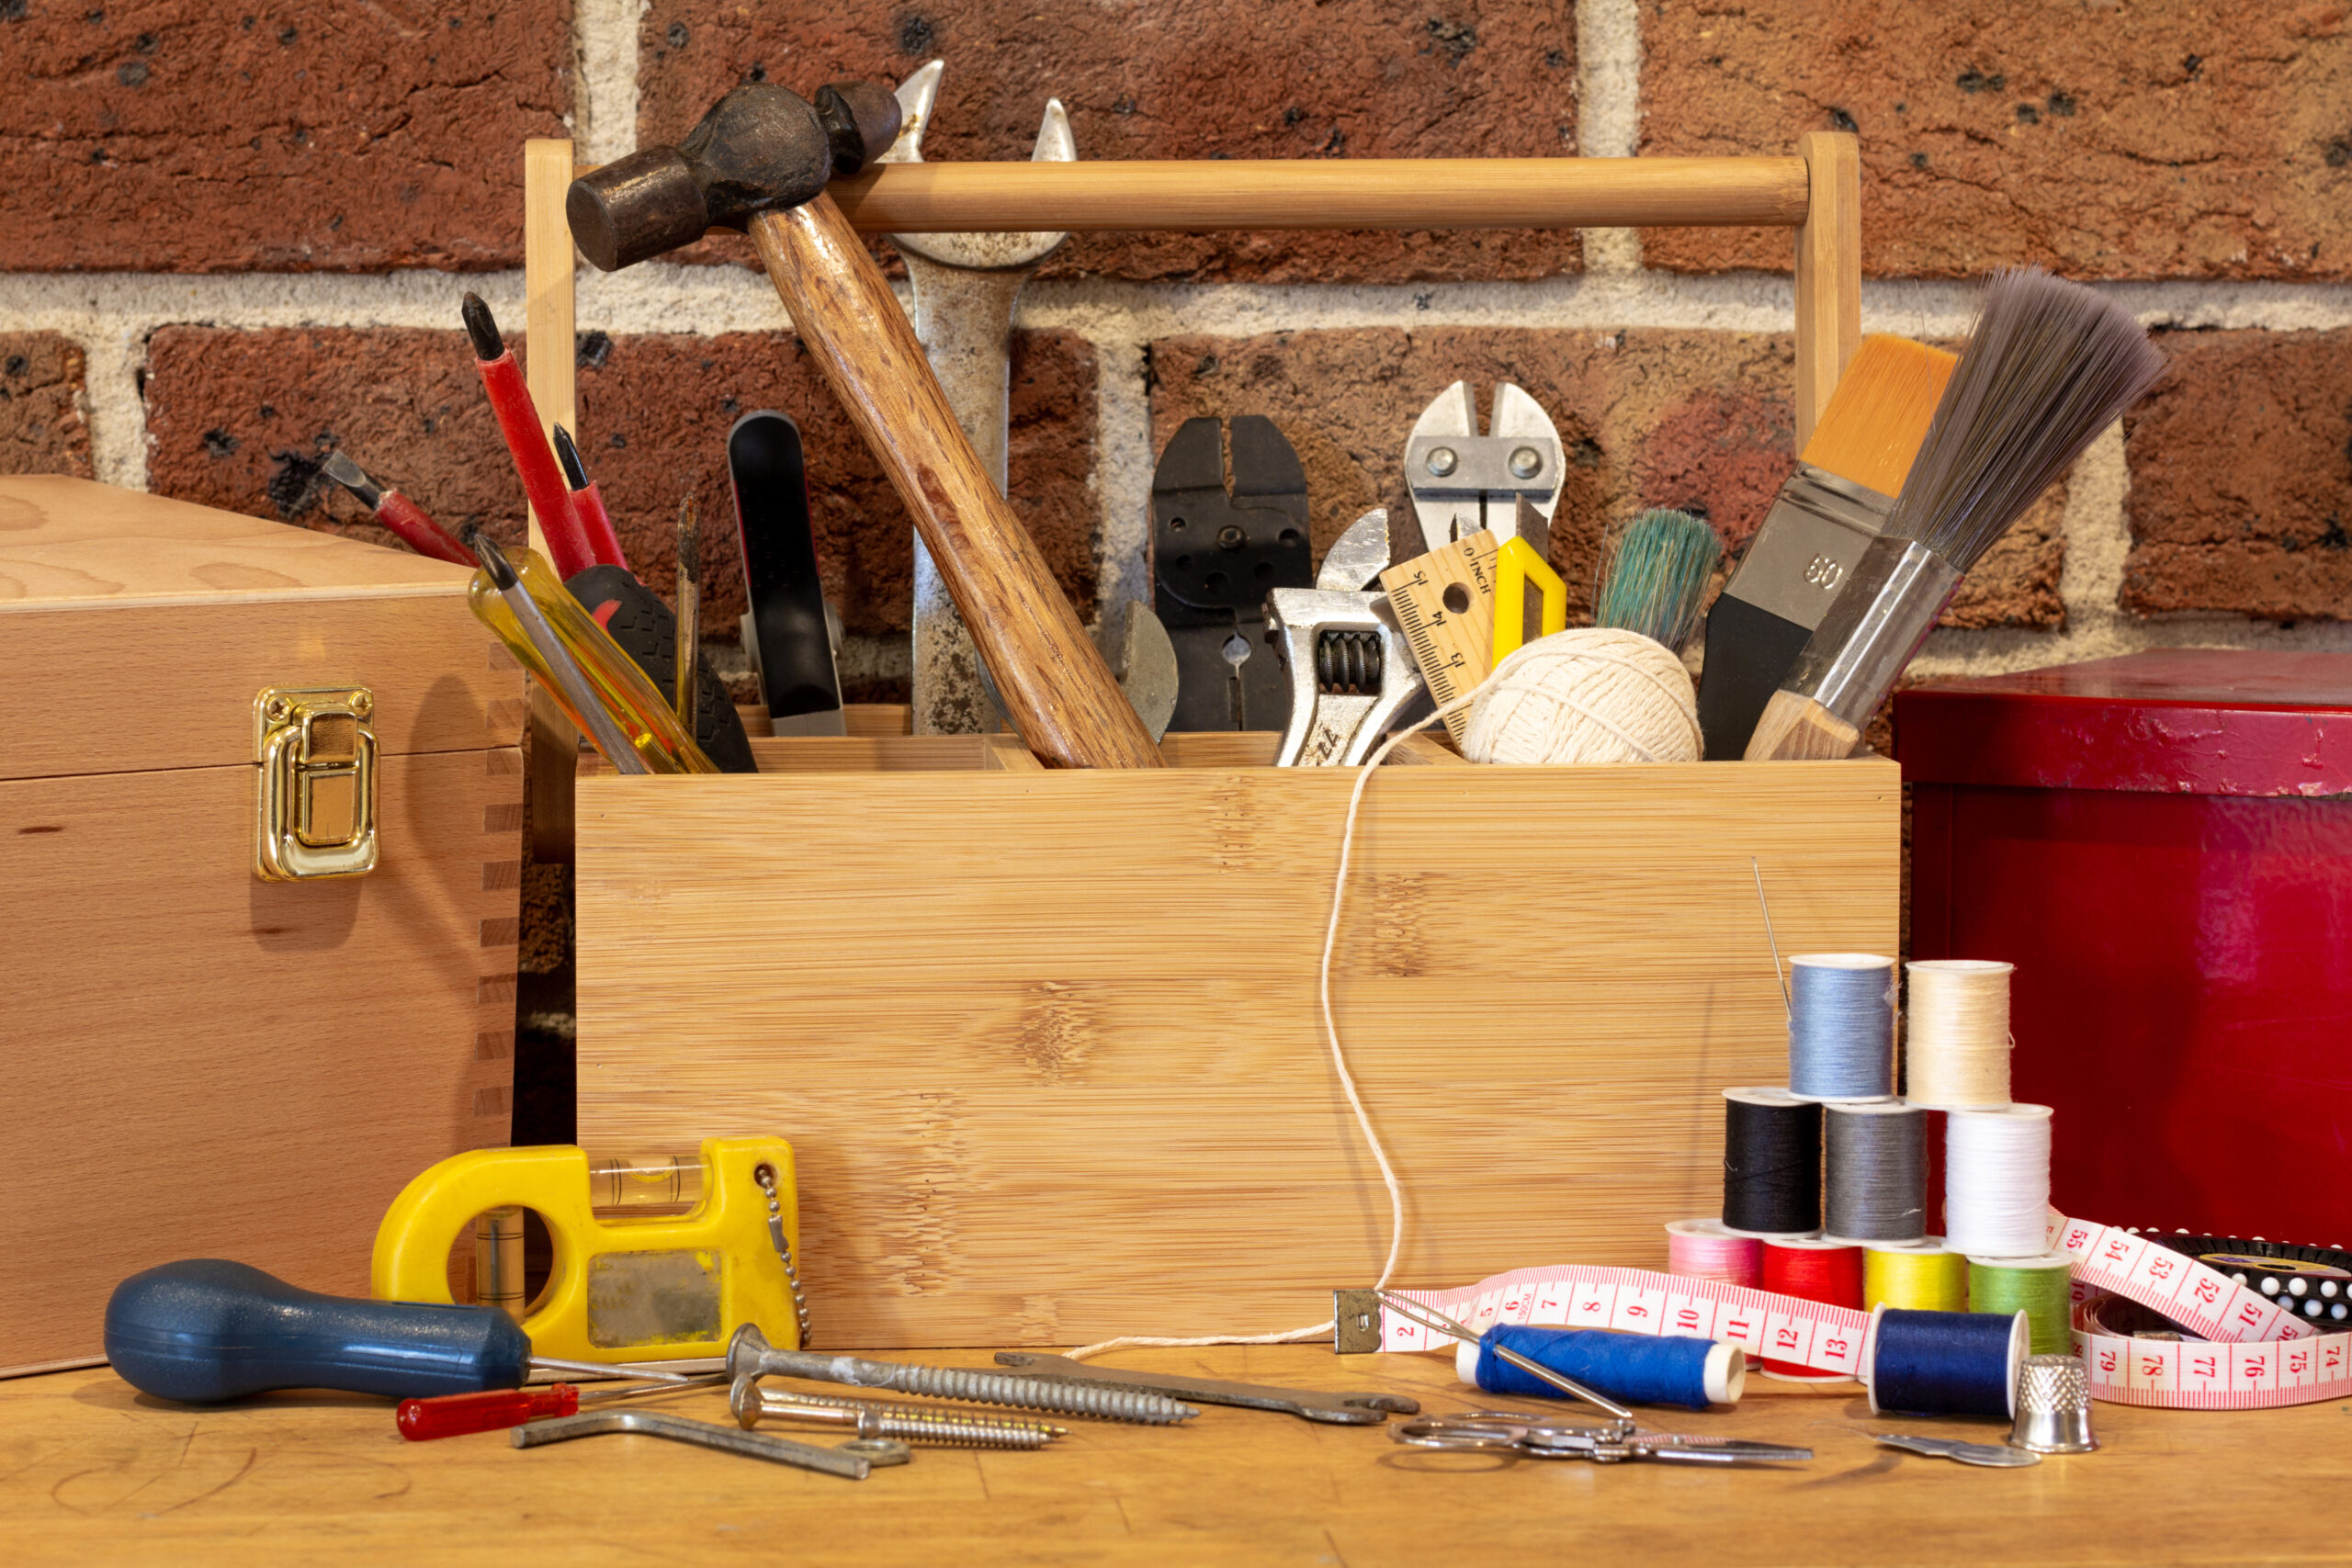 A tool box surrounded by repair tools on bench in cafe used as a repair center, to repair household items to reduce waste and support a sustainable lifestyle.